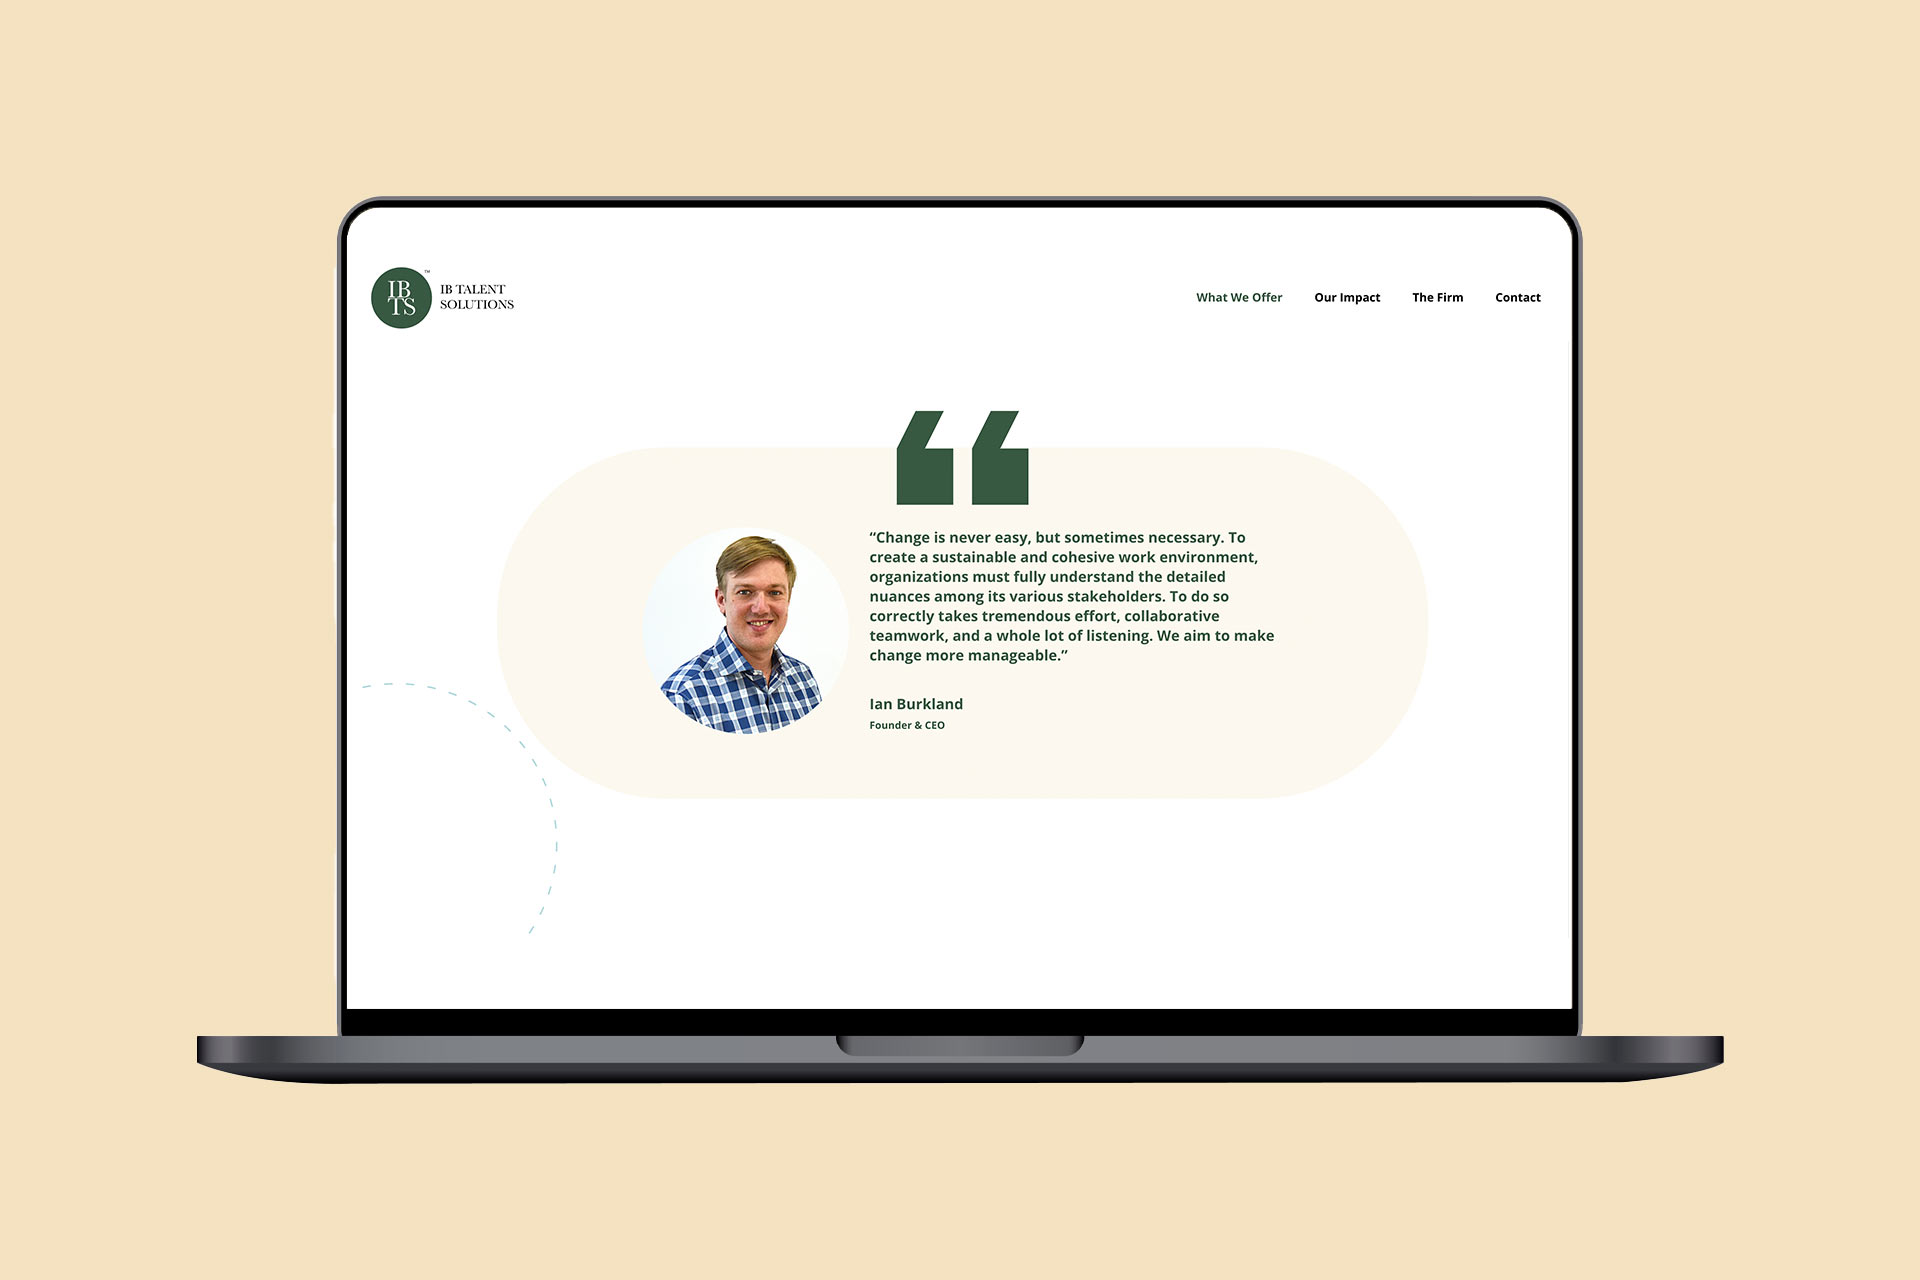 A UX/UI screen design featuring a headshot and quote from the founder and CEO.